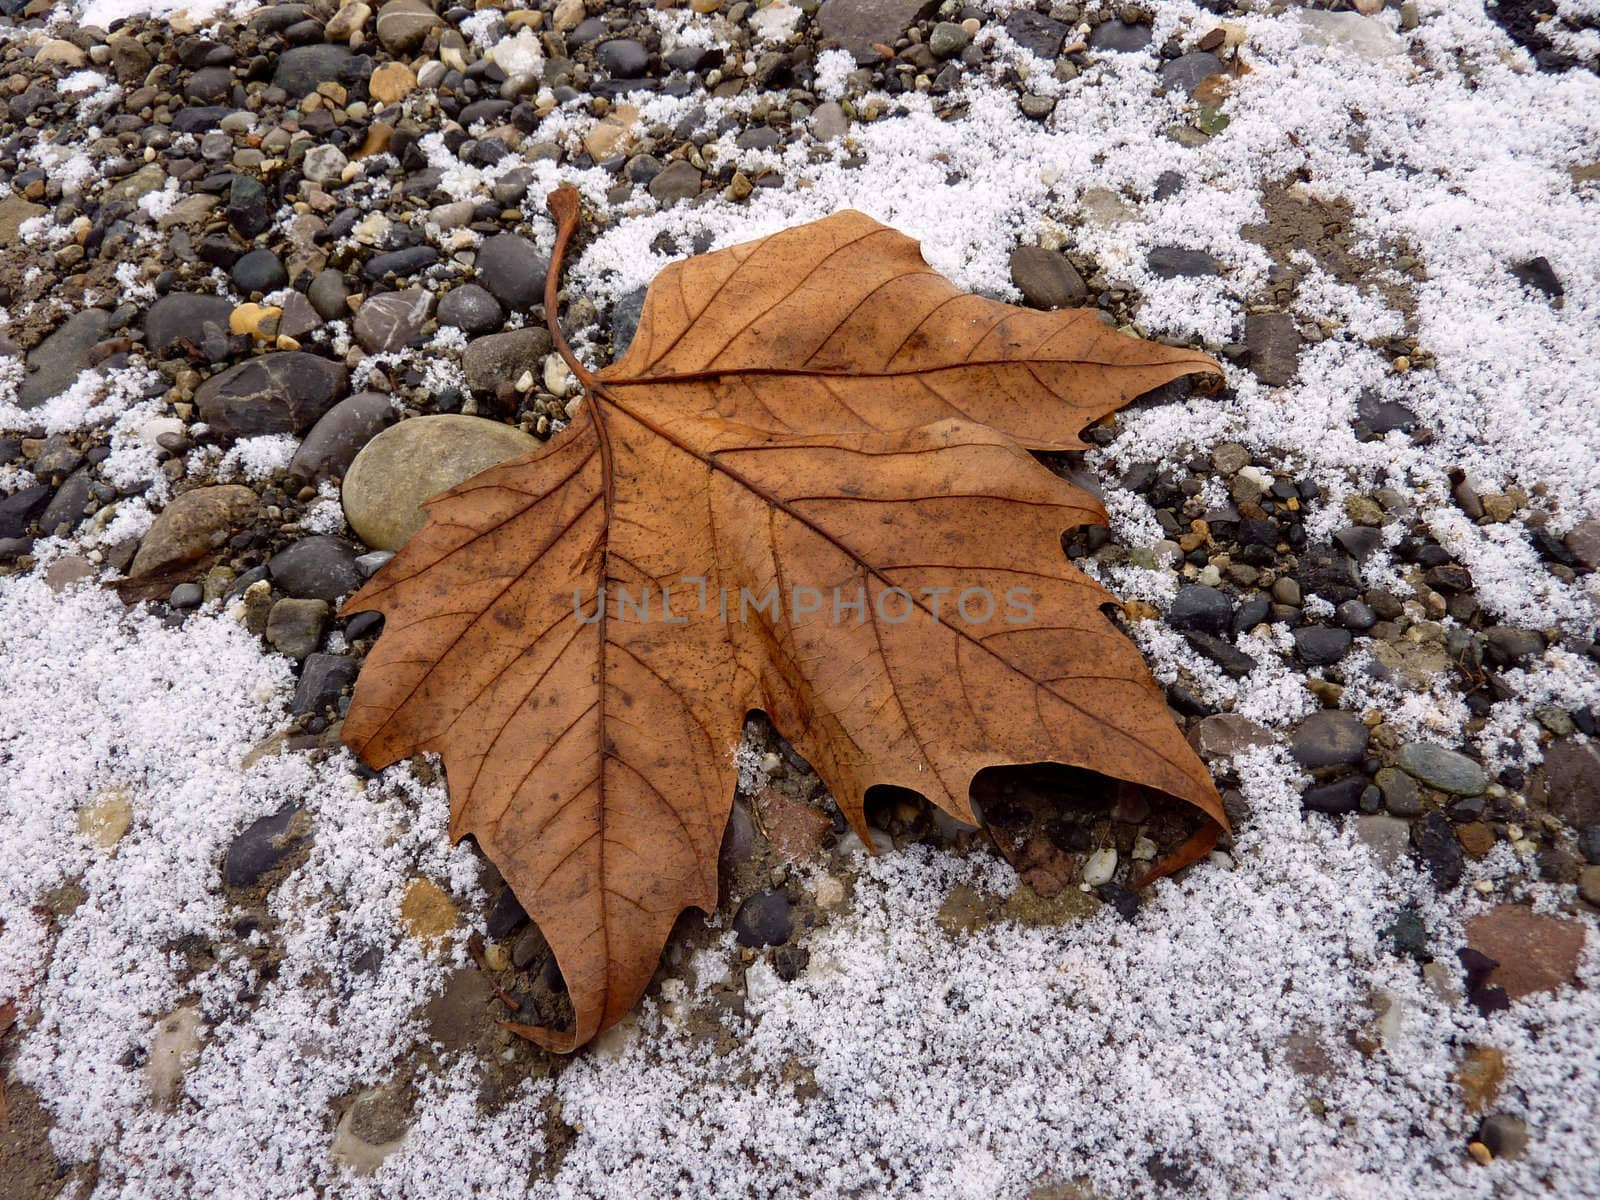 Autumn leaf on snowy with pebble ground